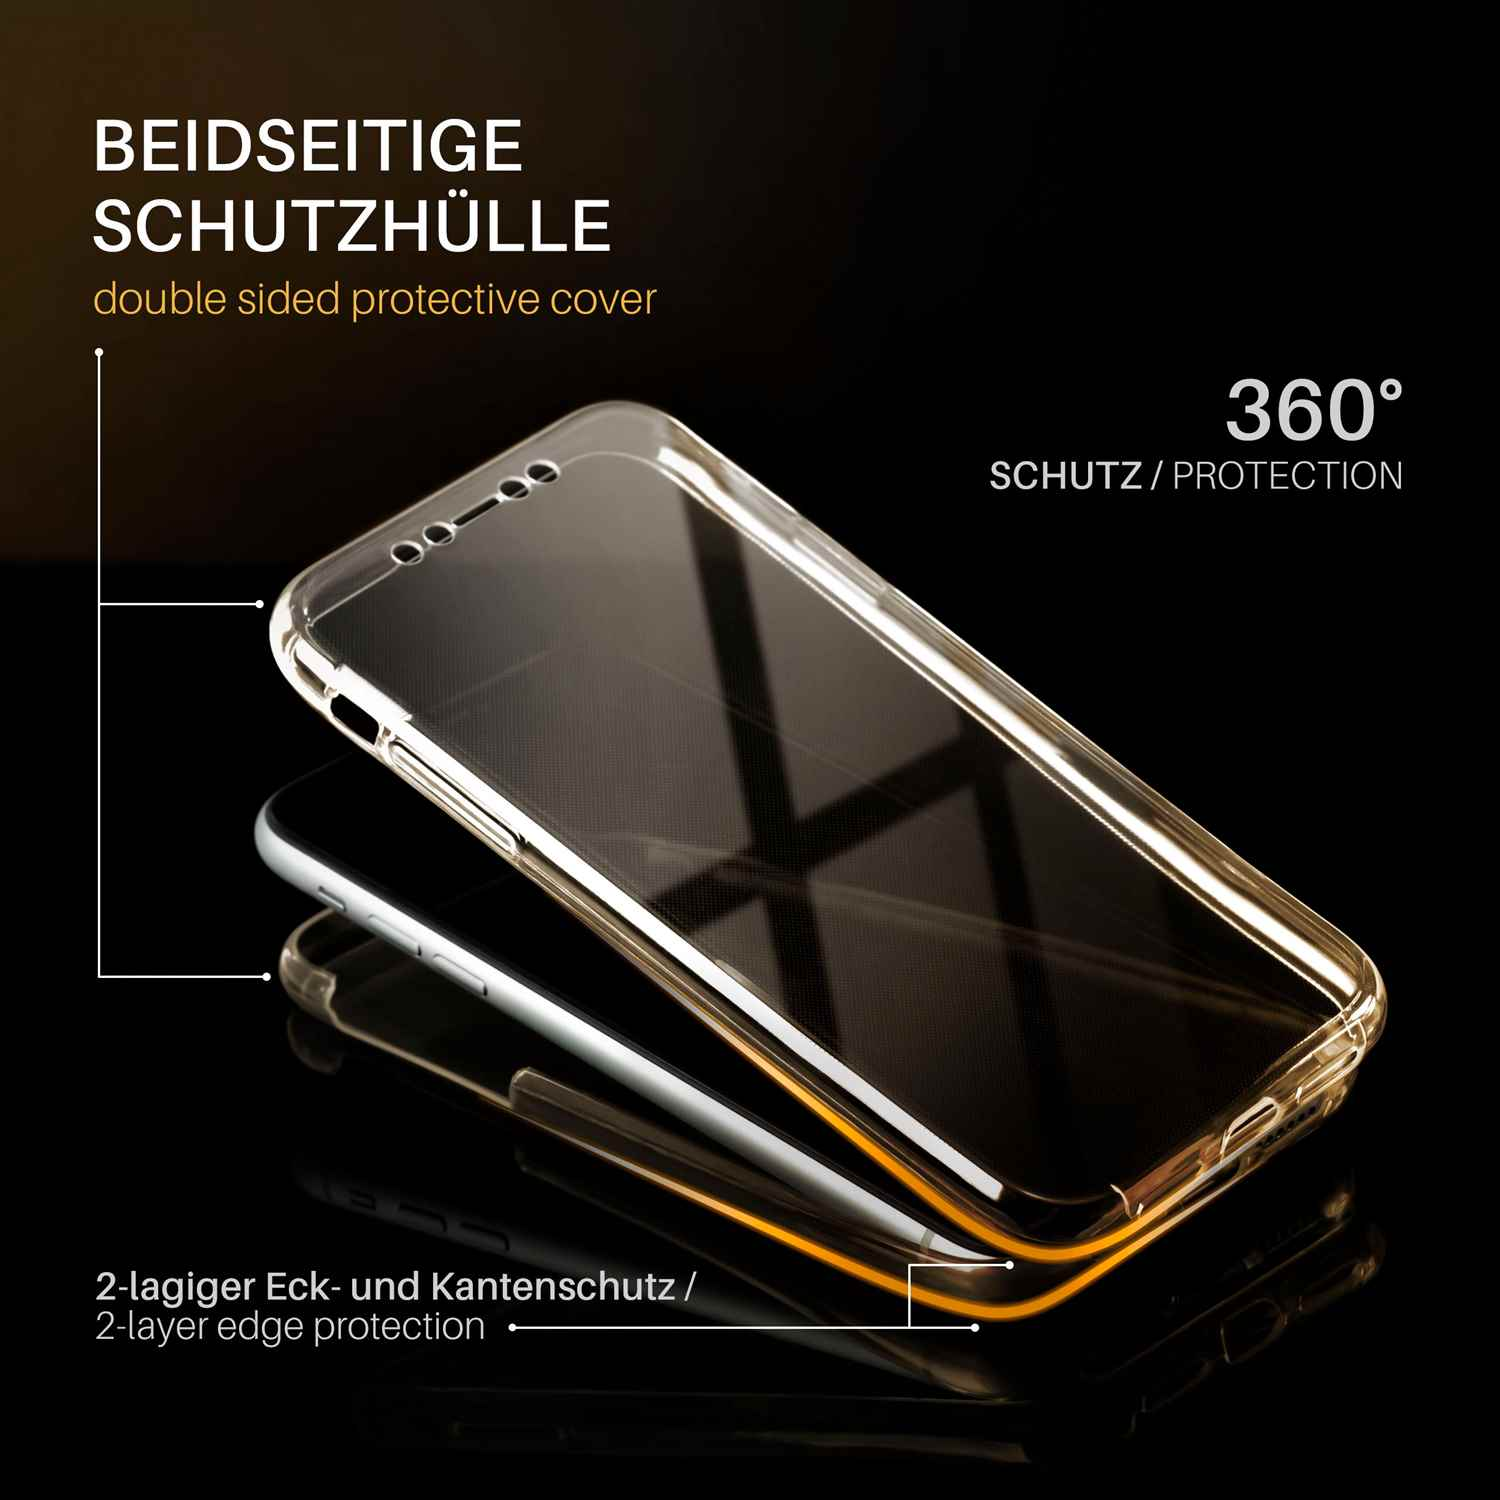 MOEX Double Gold Galaxy Case, S9, Cover, Full Samsung